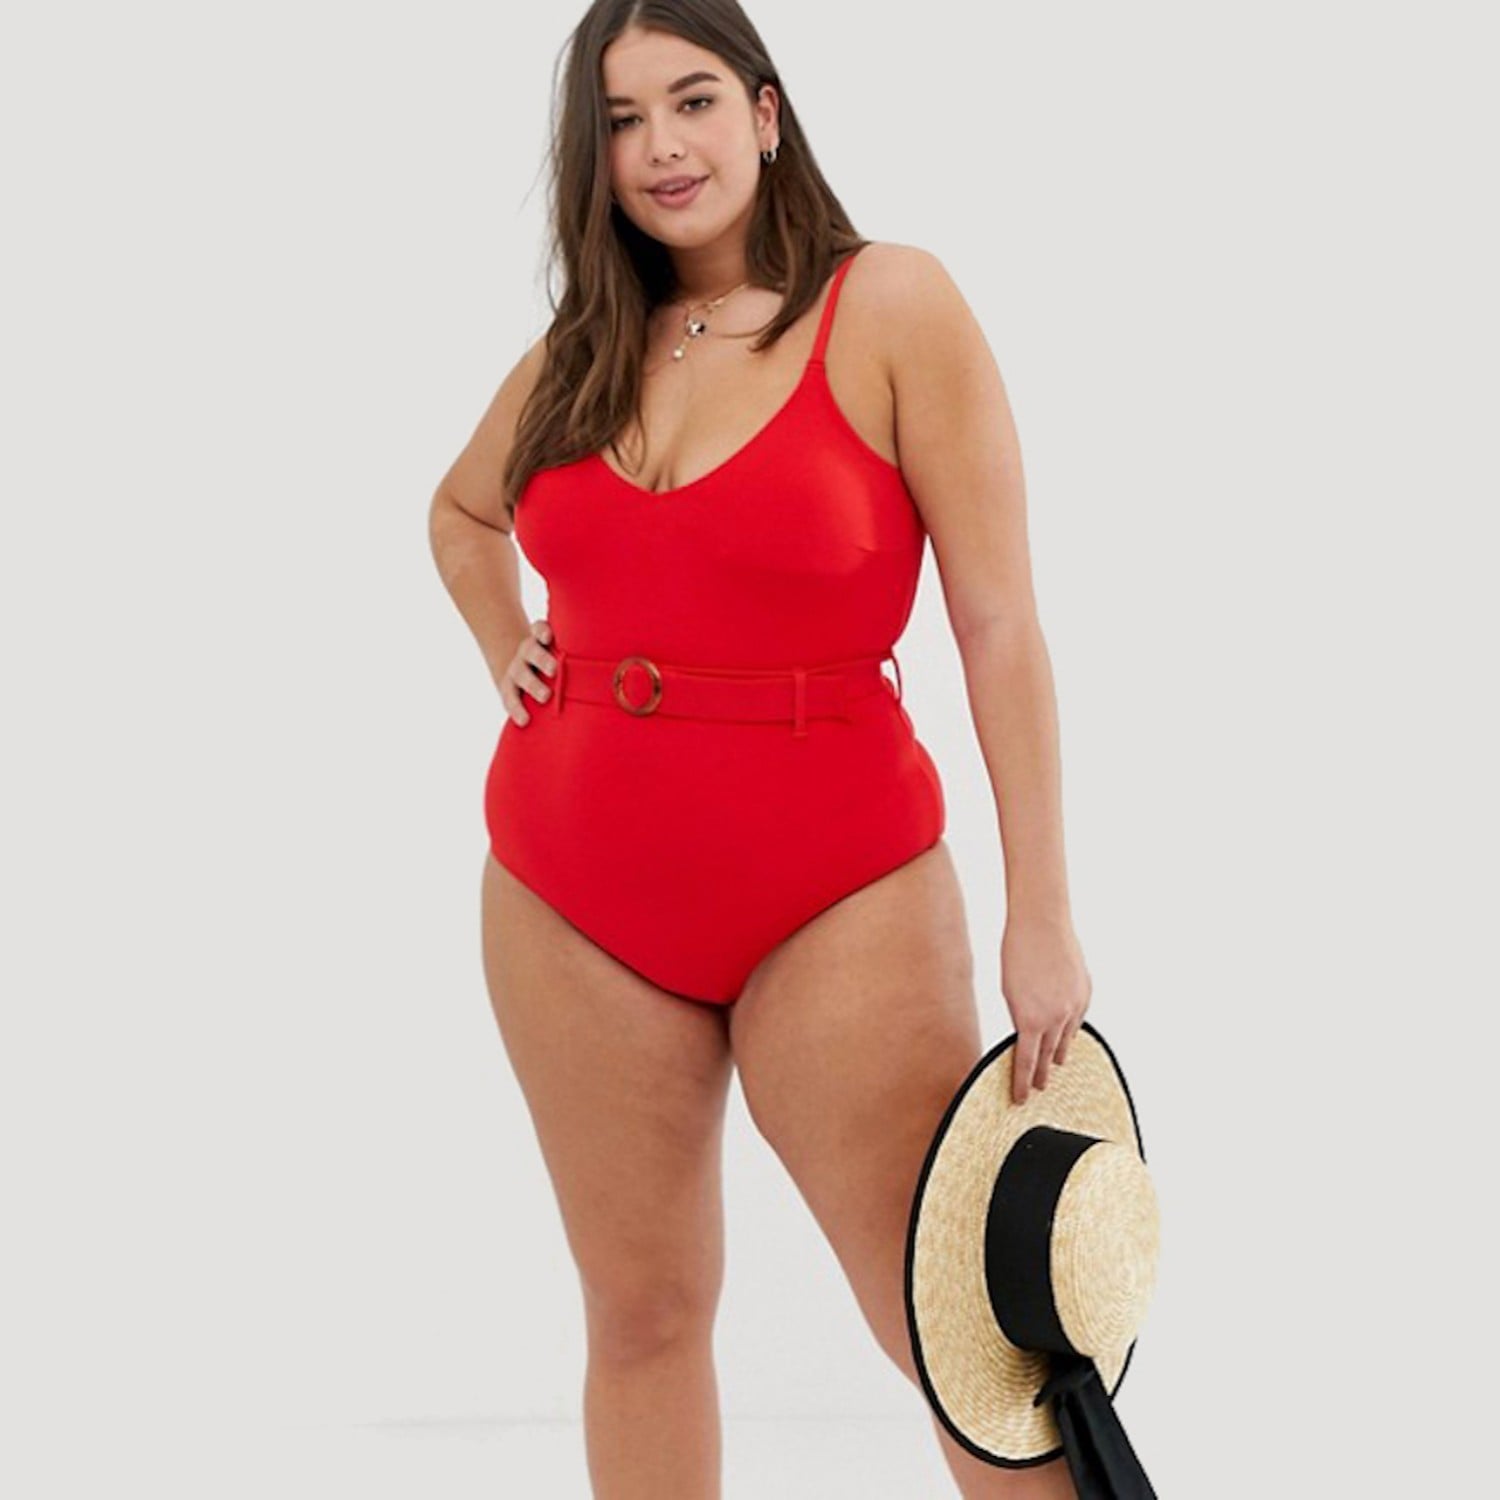 Overgivelse Accor Teenager Best Plus-Size One-Piece Swimsuits 2019 | POPSUGAR Fashion